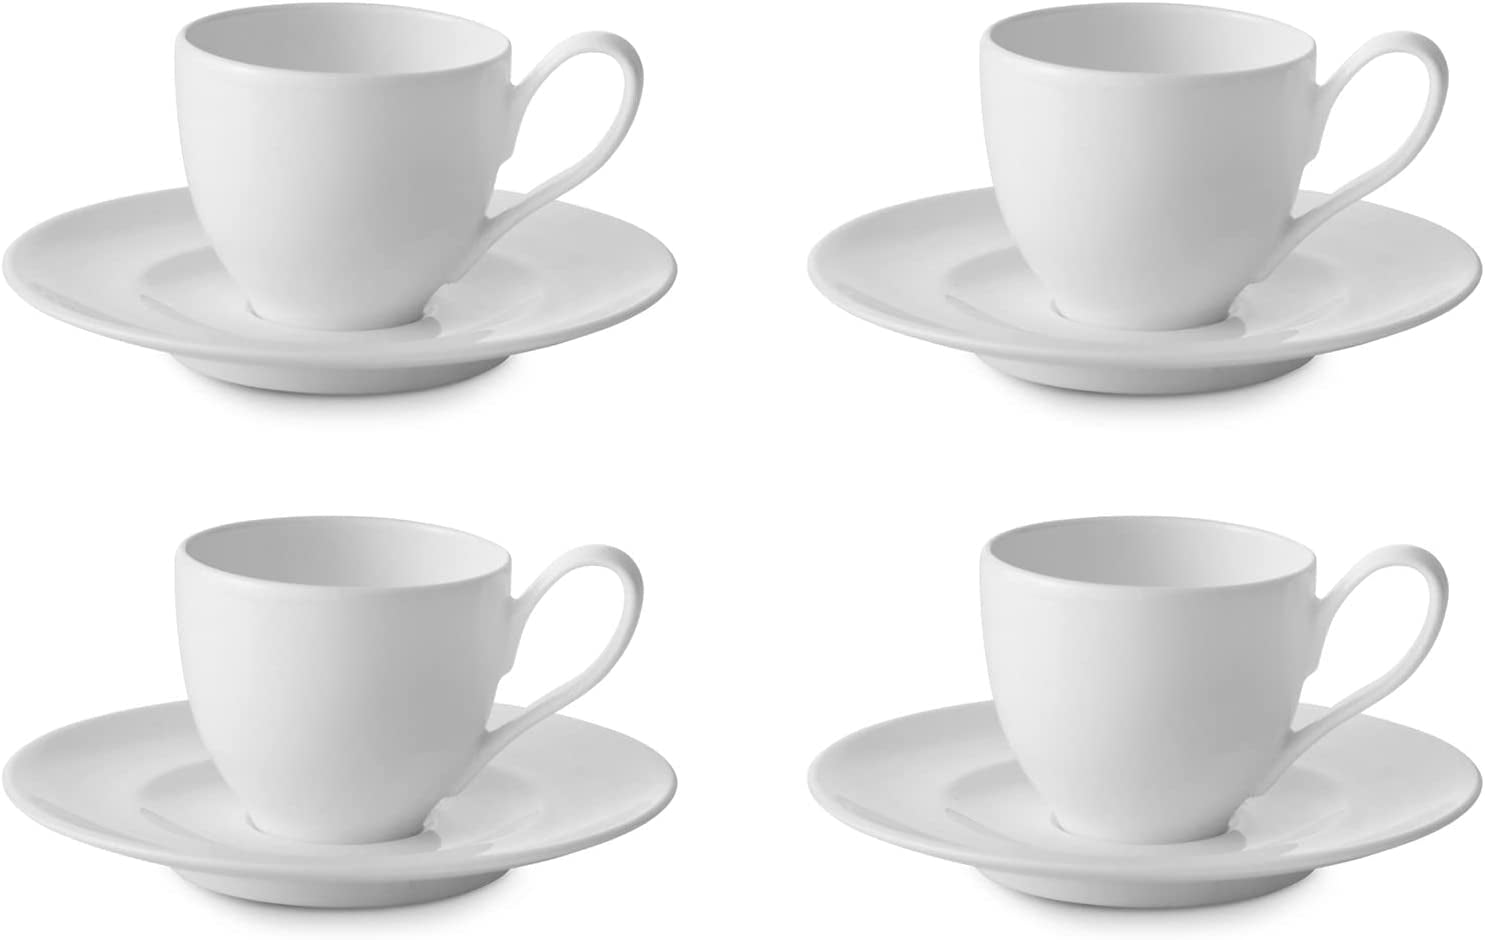 SooMILE 7oz Espresso Cups and Saucers Set Porcelain Coffee Mugs  Set of 4 for Cappuccino,Latte,Americano (Yellow): Cup & Saucer Sets